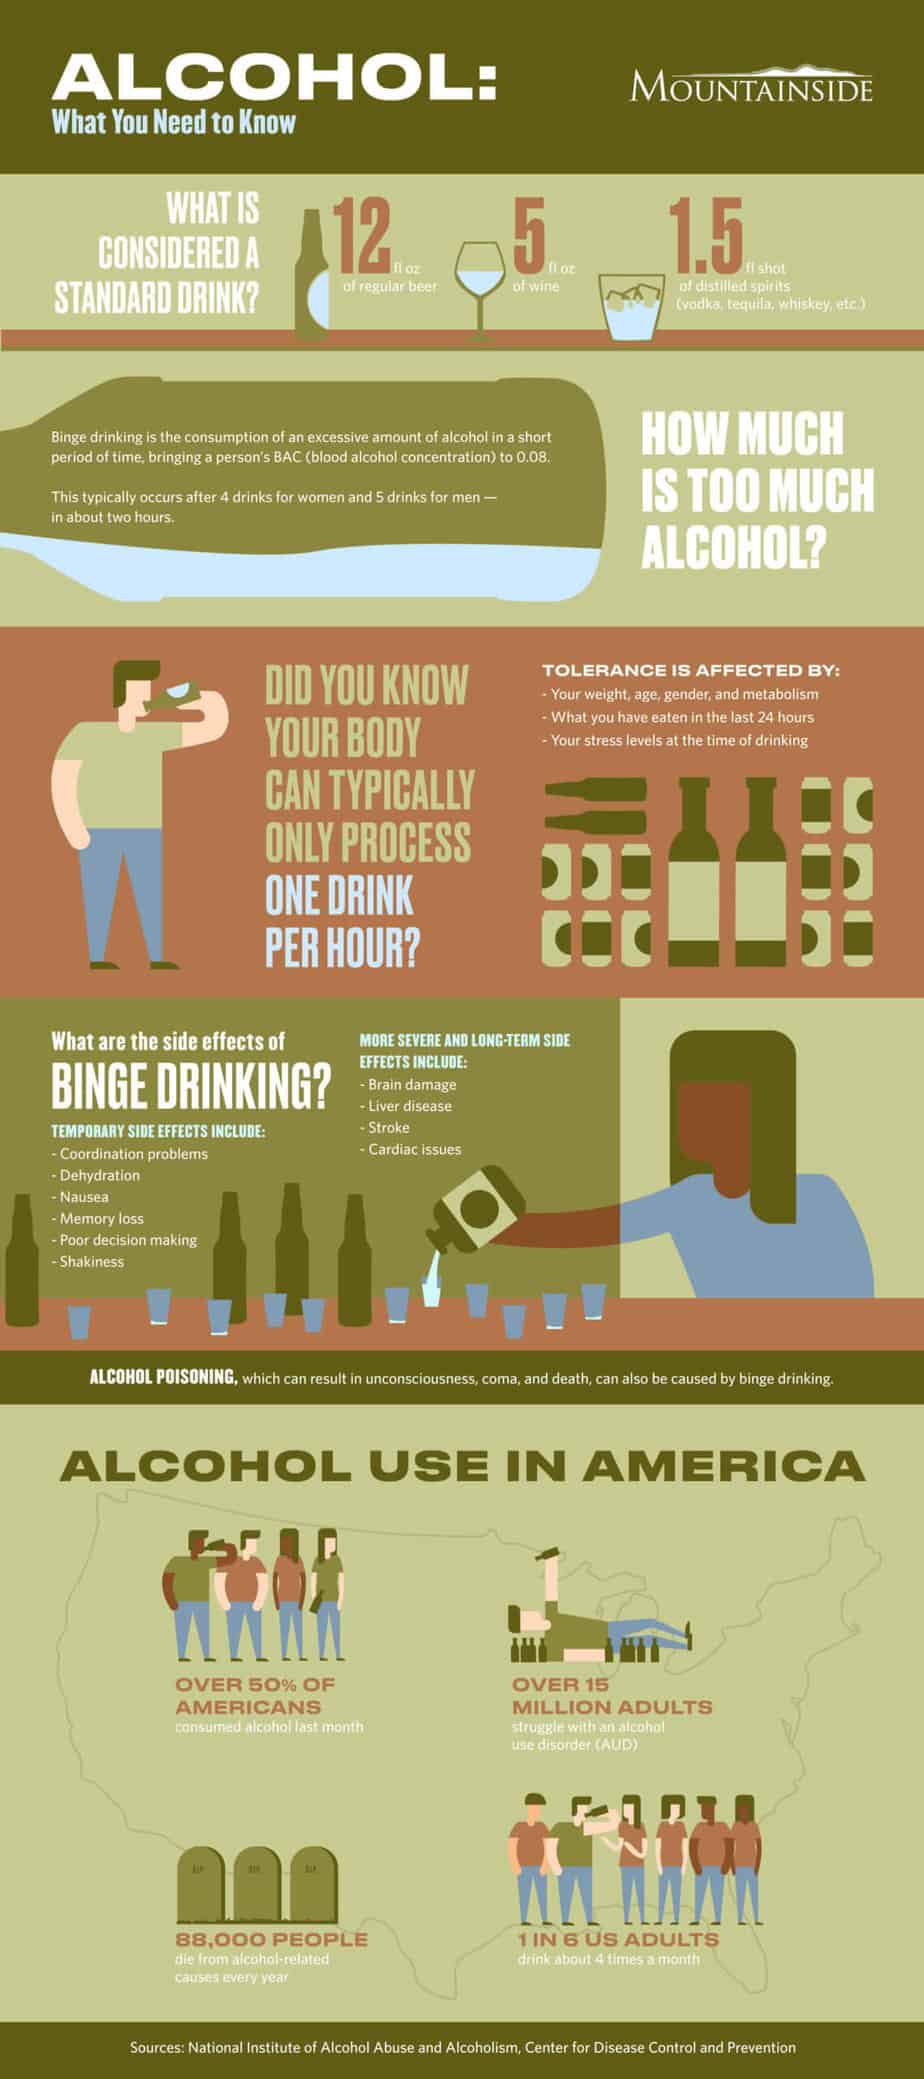 Alcohol: What You Need to Know